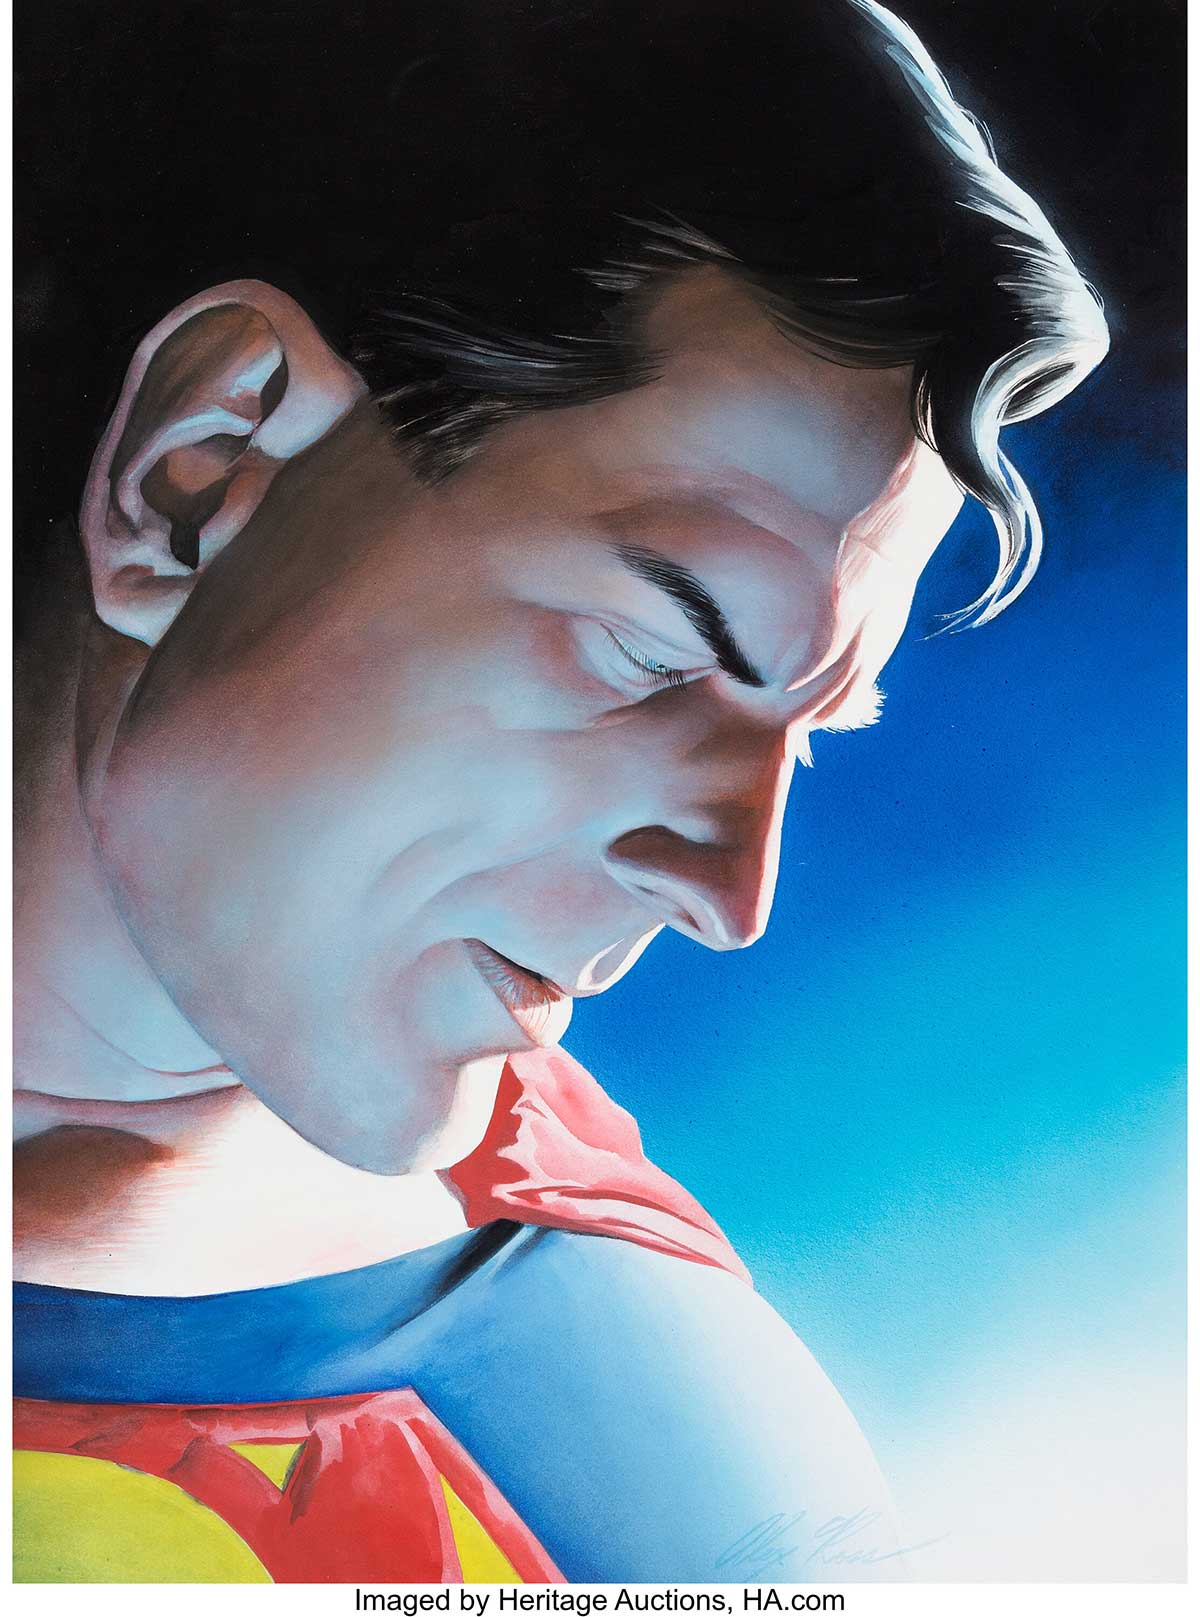 Alex_Ross_Superman_Peace_on_Earth_Cover_Original_Art_DC_1998_Heritage_Auctions.jpg